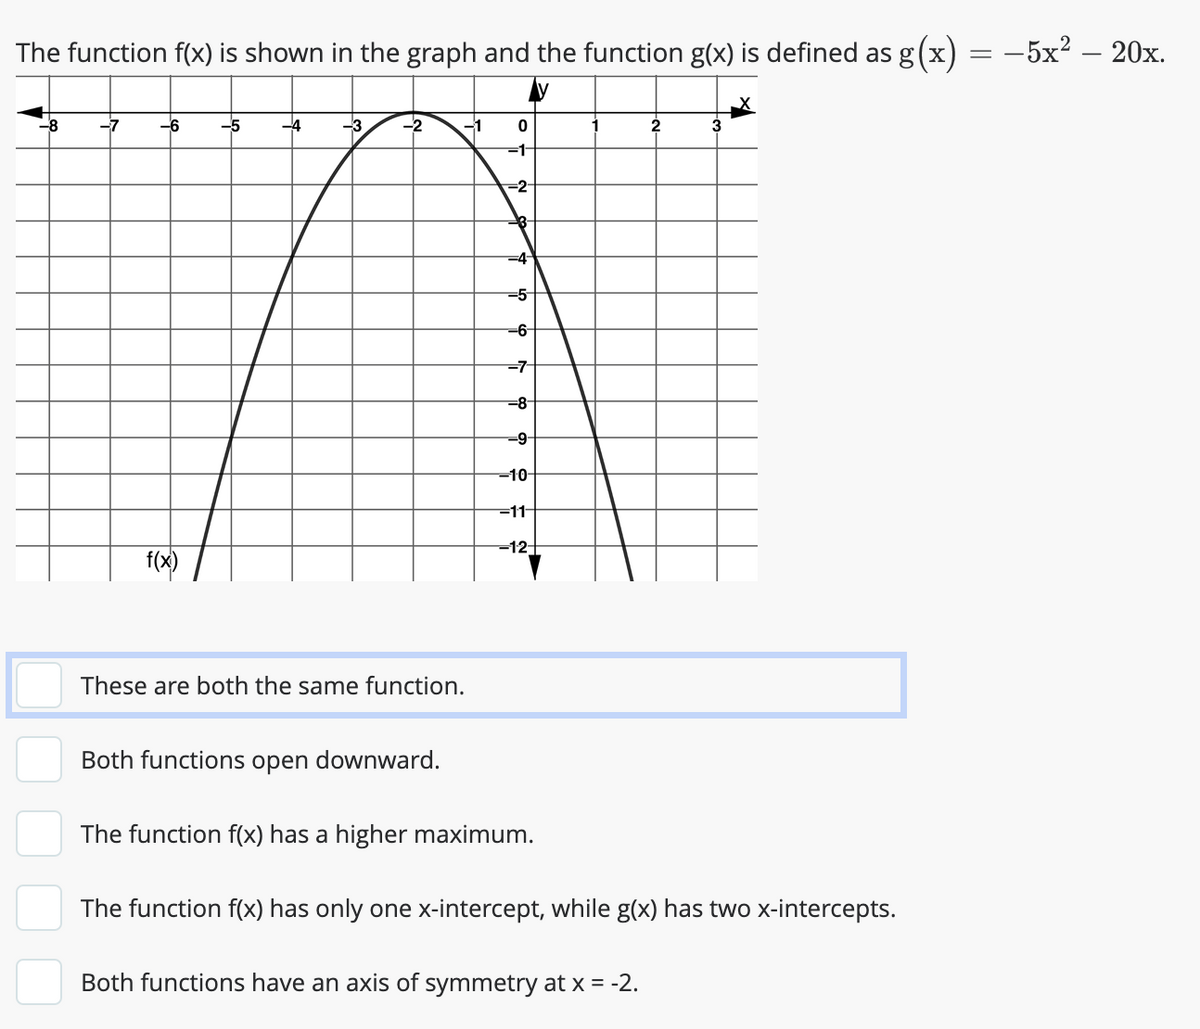 The function f(x) is shown in the graph and the function g(x) is defined as g(x) = −5x² – 20x.
V
-8
-7
-6
f(x)
-3
-2
-1
These are both the same function.
Both functions open downward.
0
=1
=2
£3-
-4
-5
-6-
-7-
-8-
-9-
-10-
-11-
-12-
The function f(x) has a higher maximum.
1
2
Both functions have an axis of symmetry at x = -2.
3
The function f(x) has only one x-intercept, while g(x) has two x-intercepts.